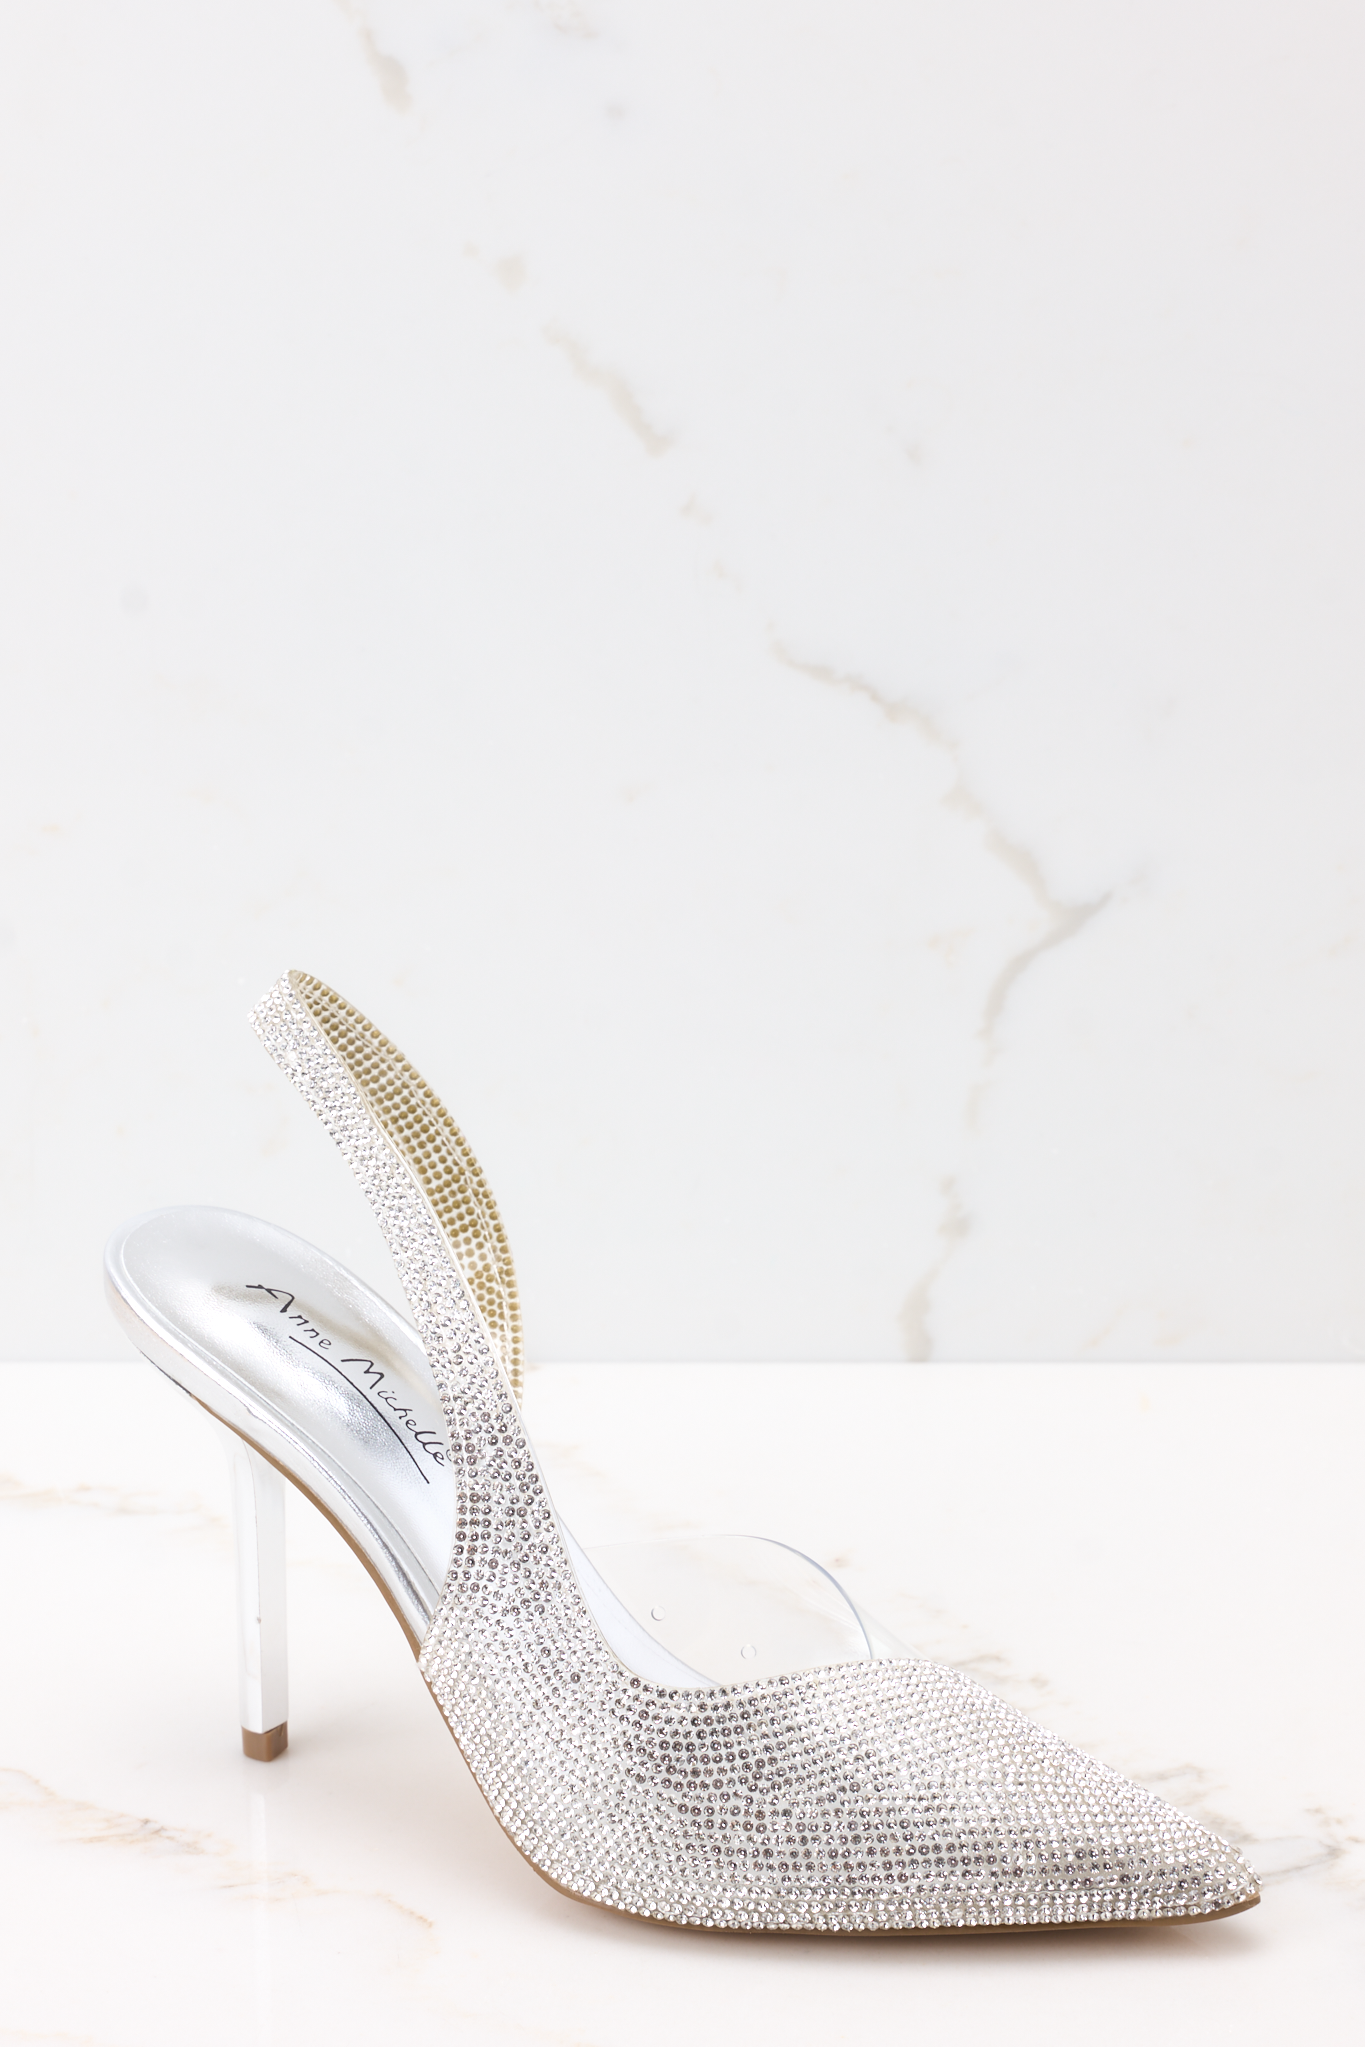 Premium Photo | A silver high heel shoe with a silver design on the bottom.